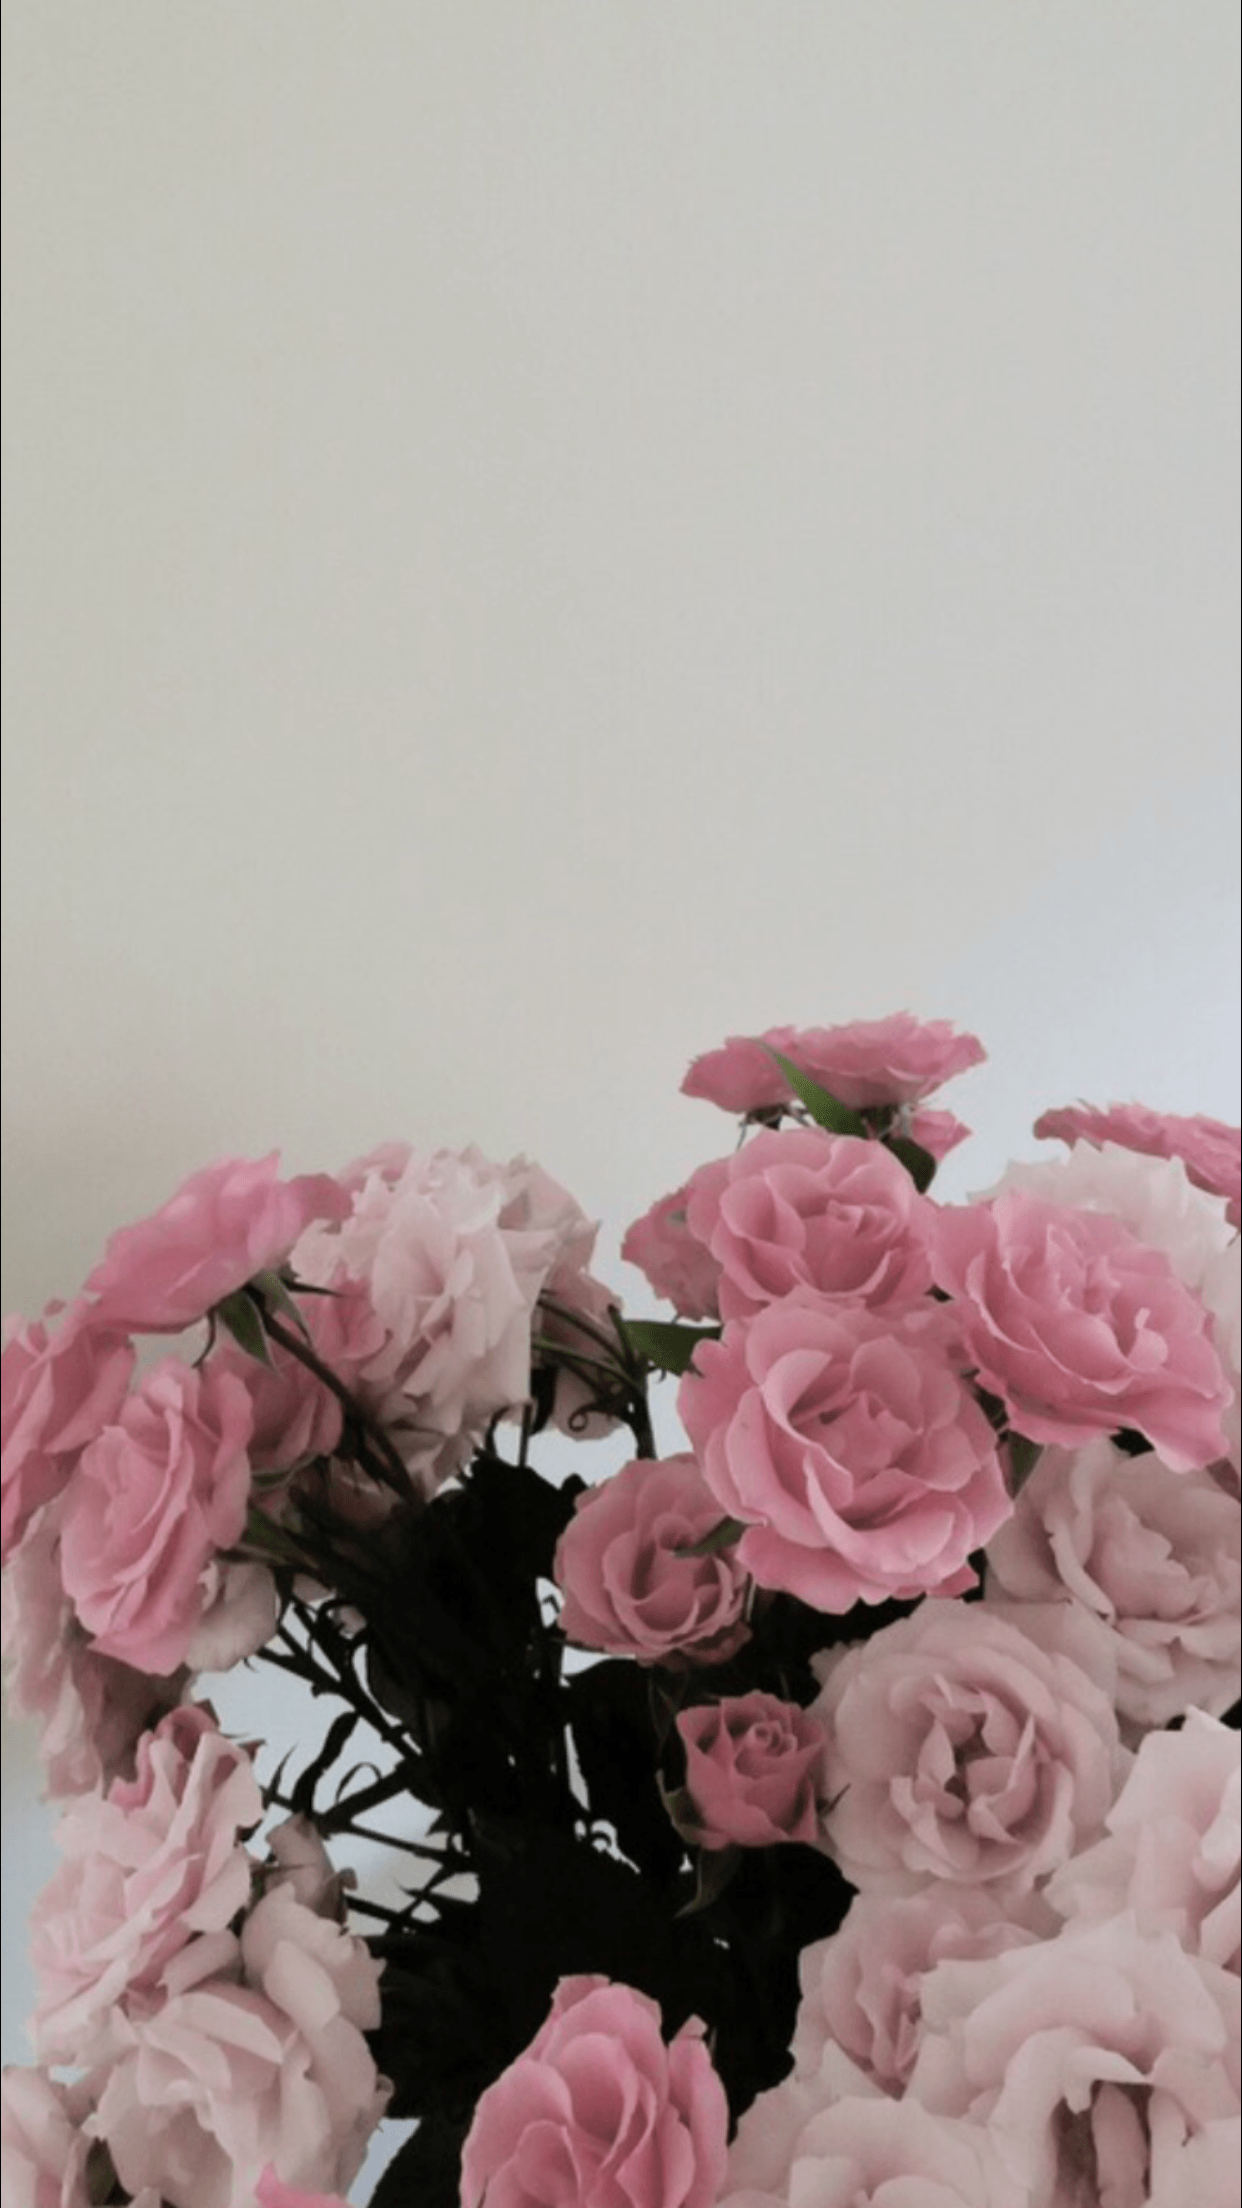 A vase filled with pink roses on a white background. - Flower